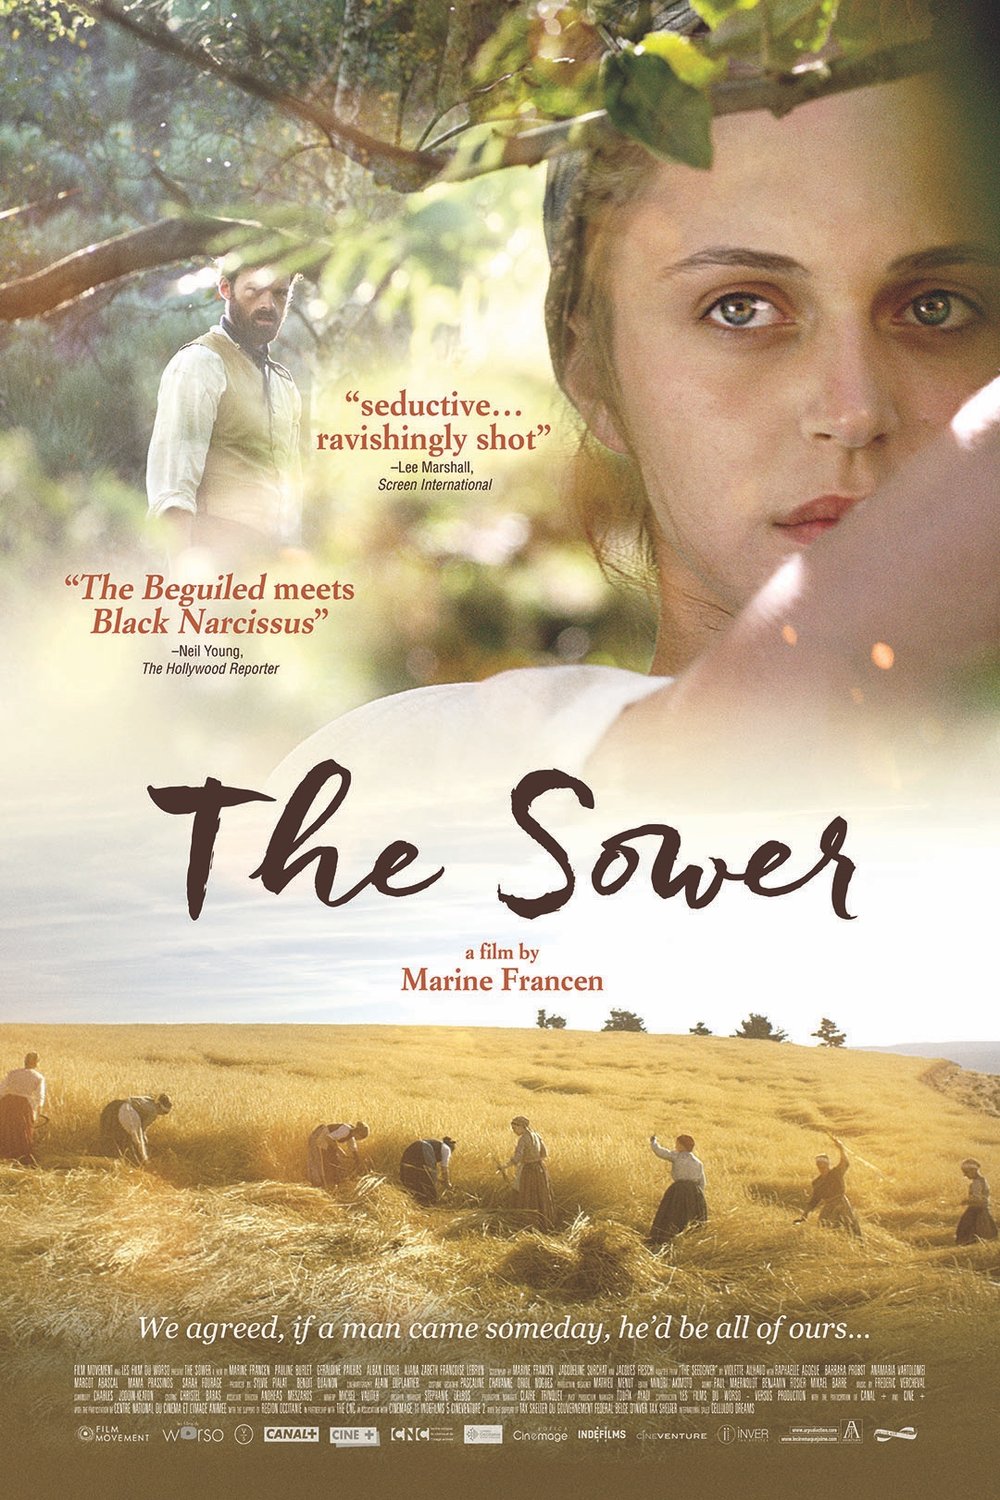 Poster of the movie The Sower